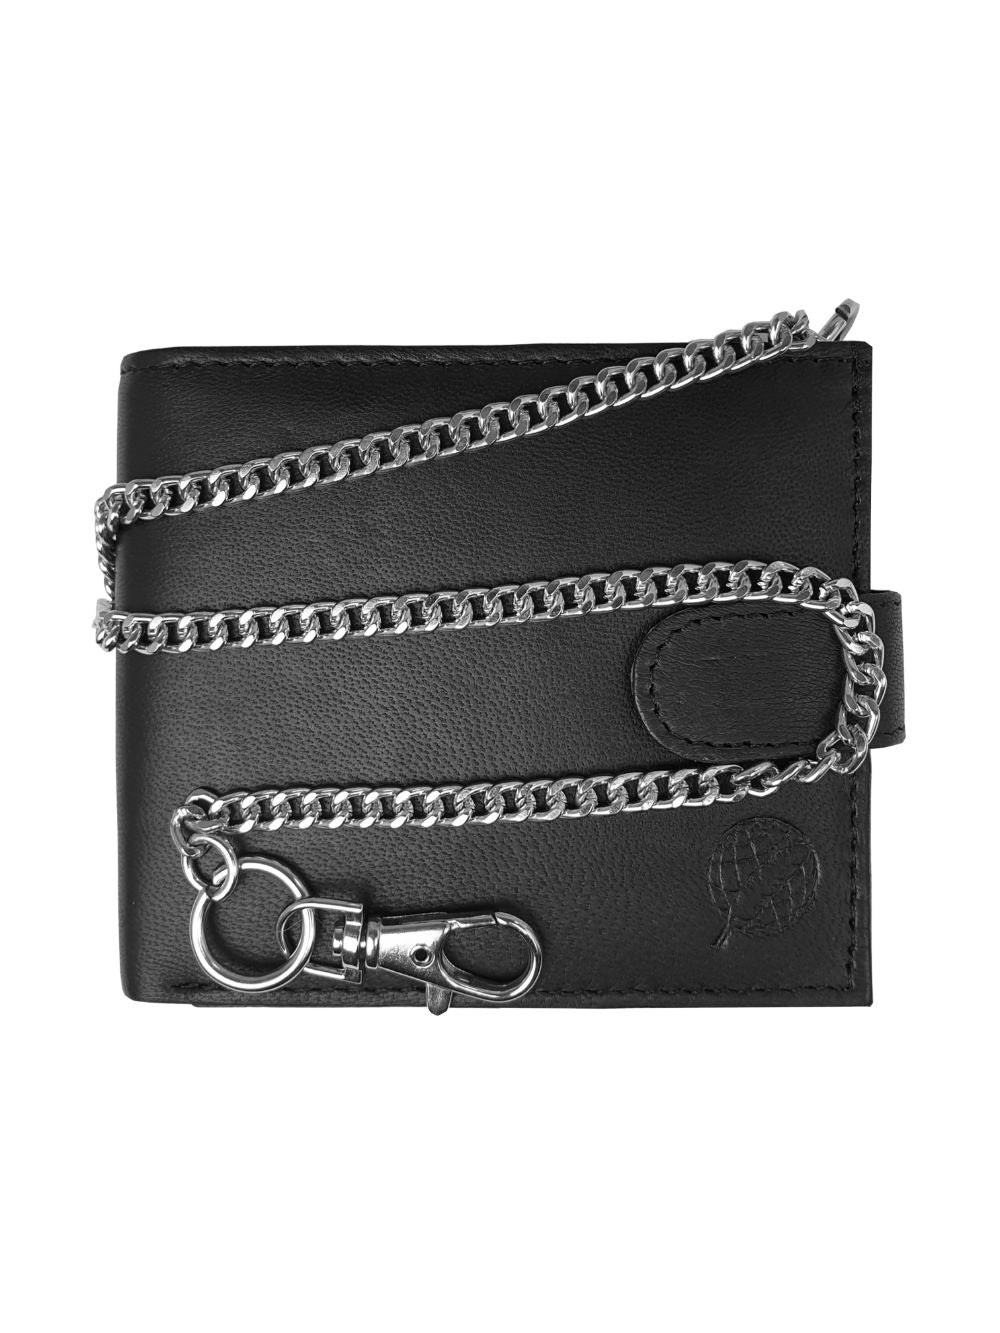  Roamlite Mens chained wallet black leather rl506 front with chain